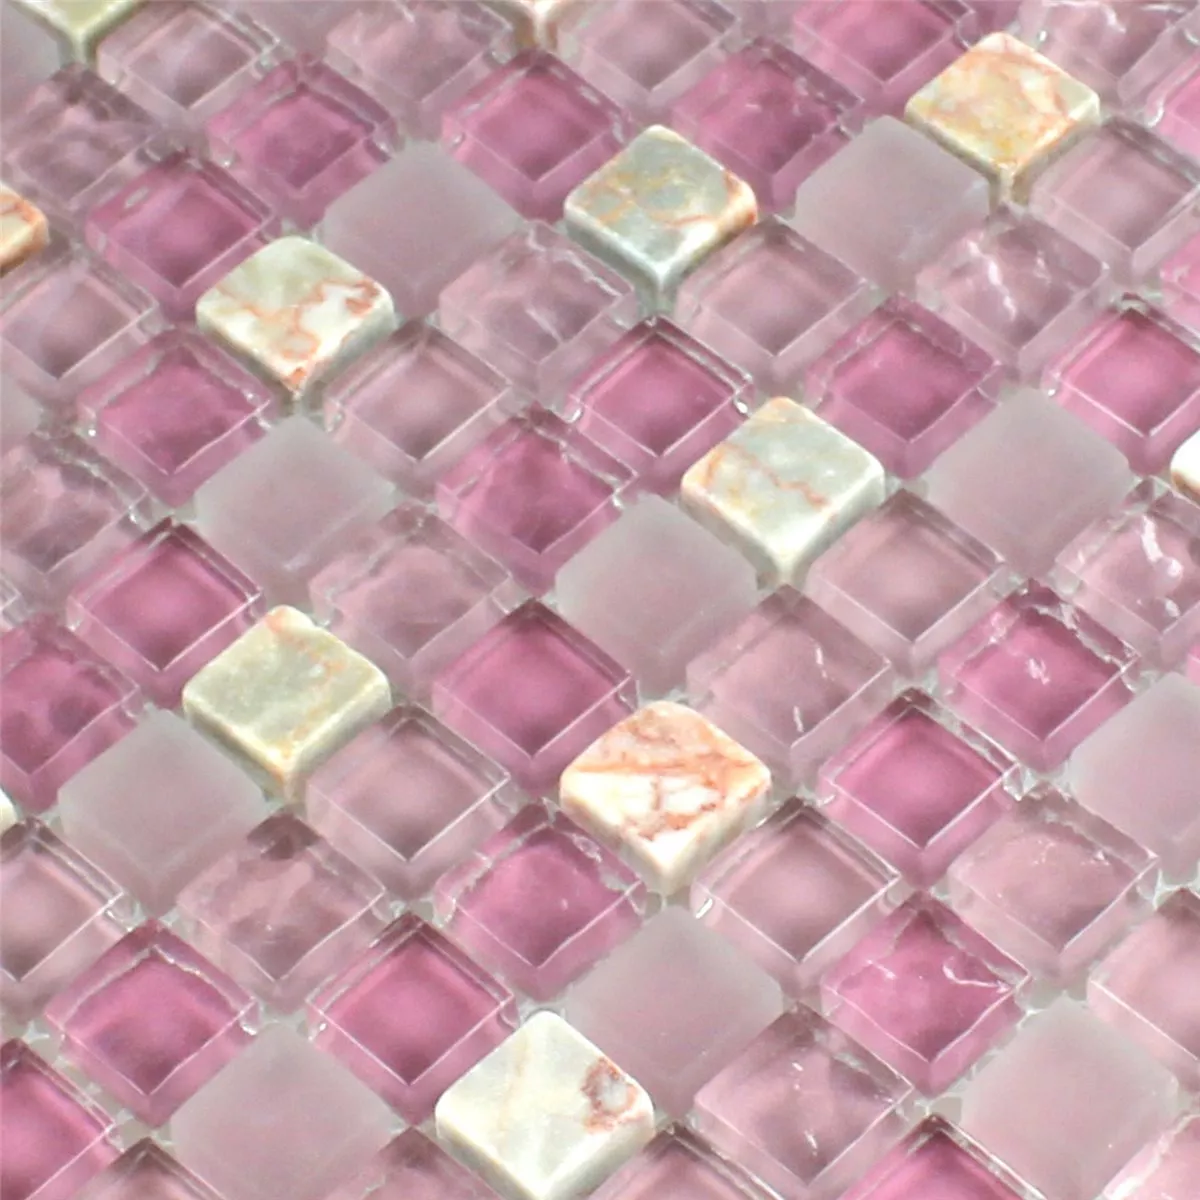 Sample Mosaic Tiles Glass Marble Pink Mix 